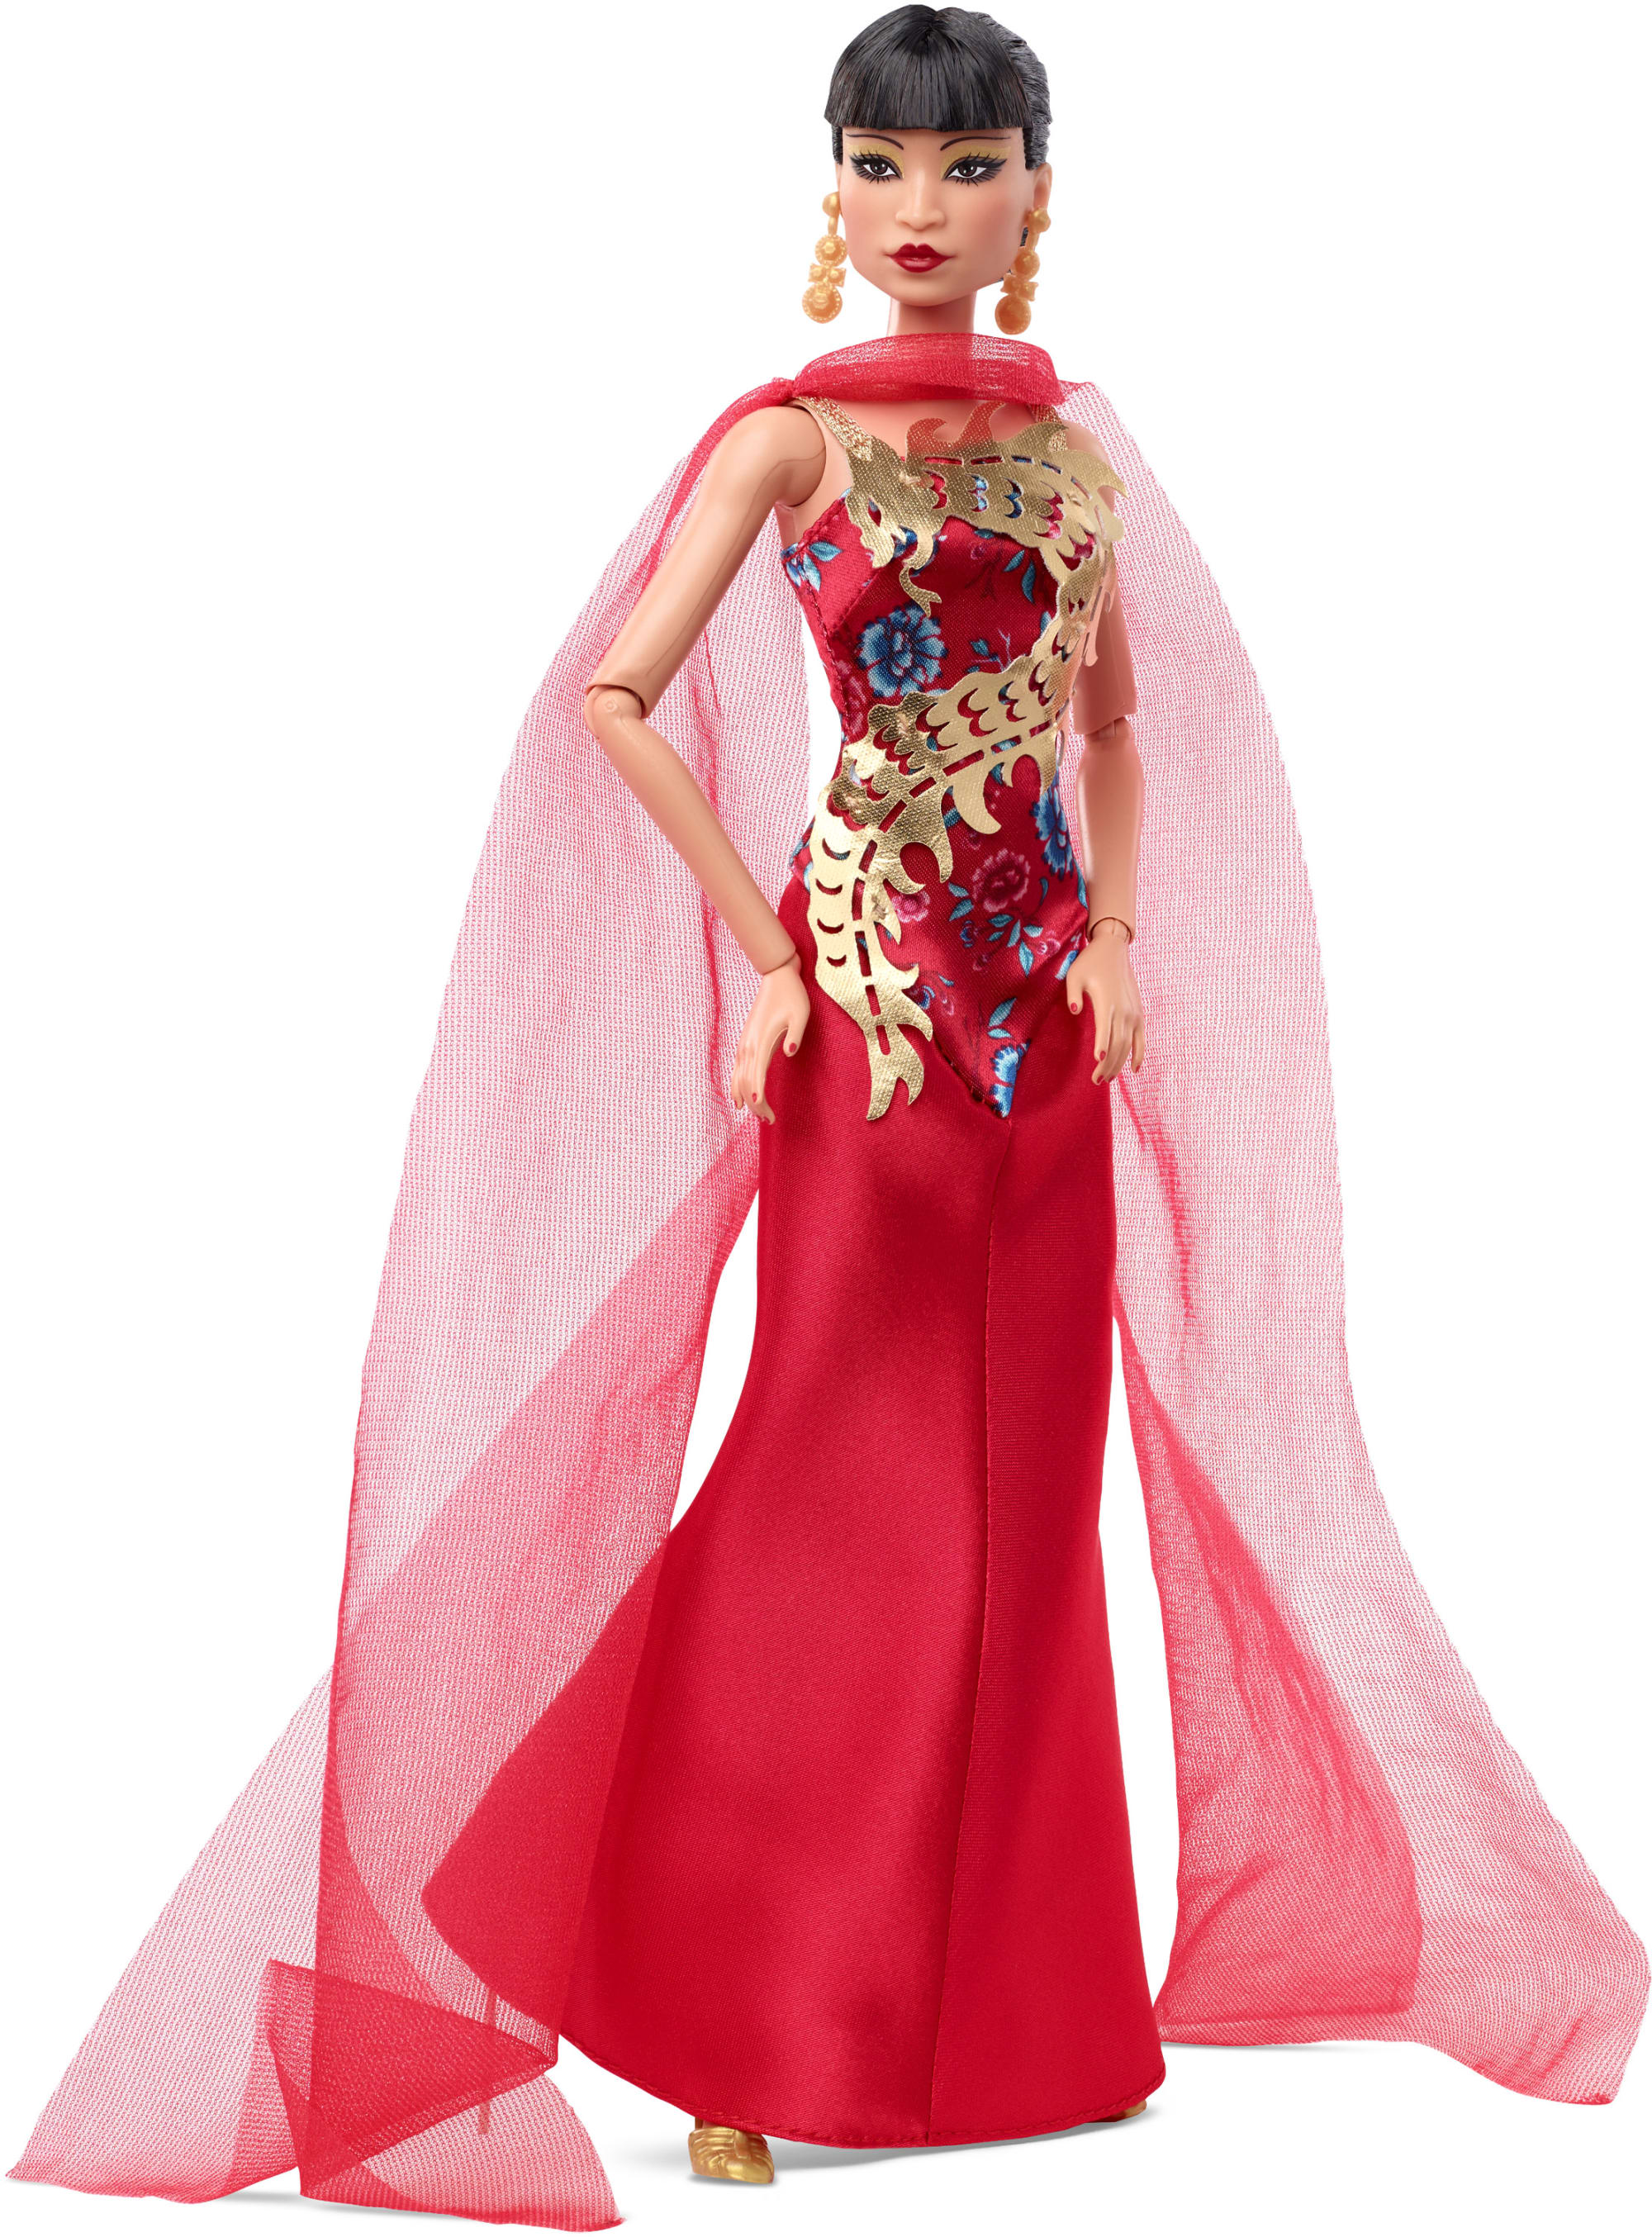 Barbie Signature Doll, Lunar New Year Collectible in Traditional Hanfu Robe  with Chinese Prints, Displayable Packaging